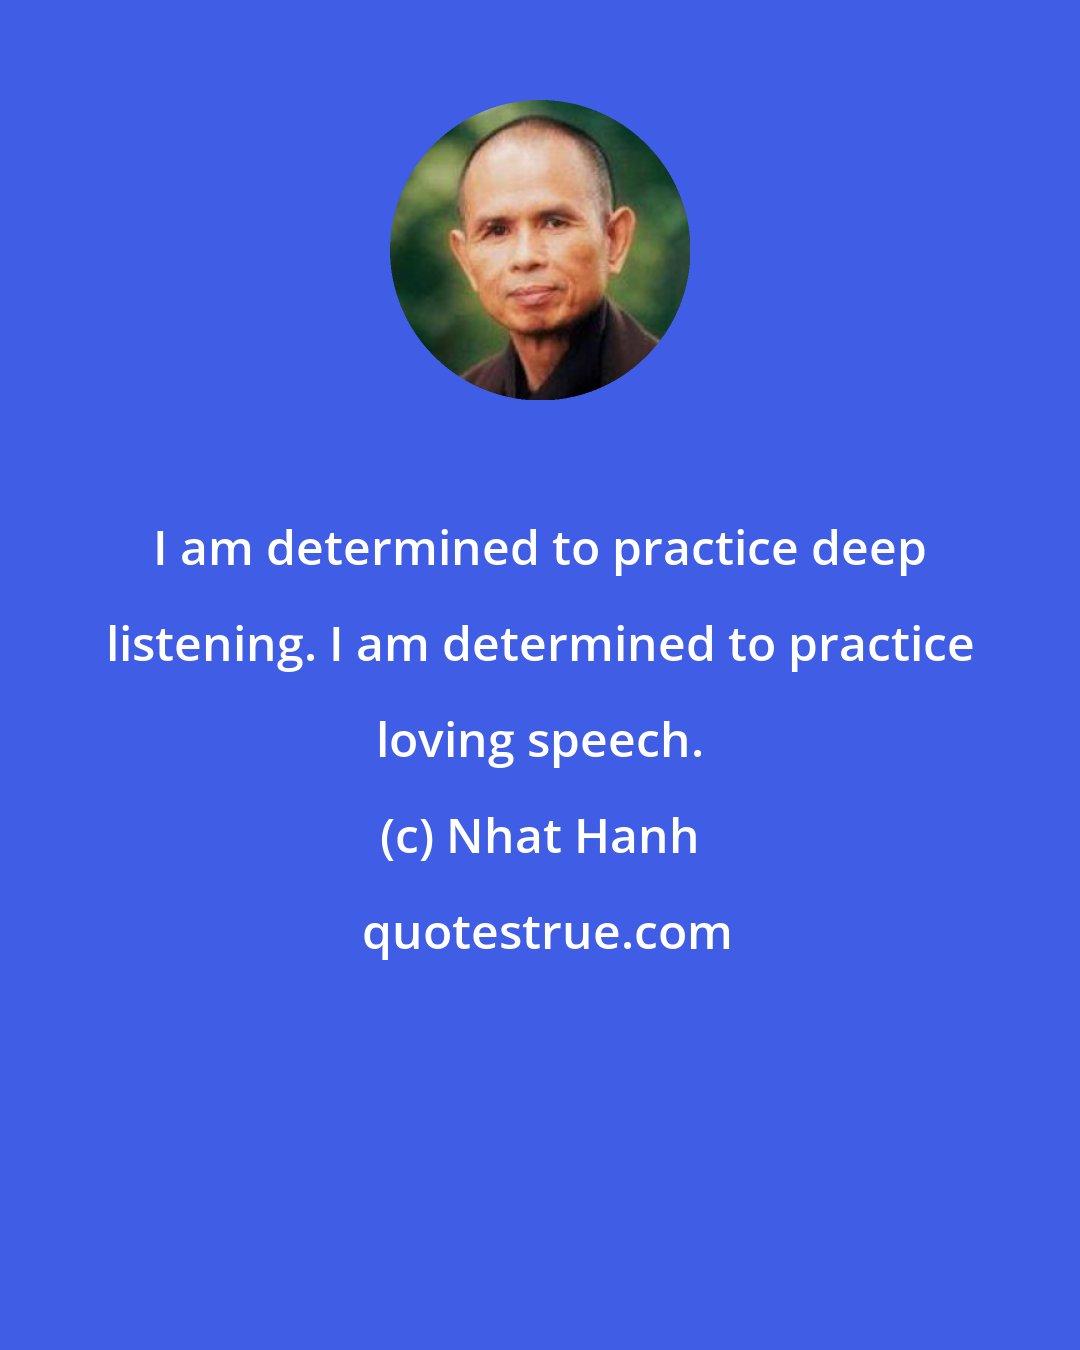 Nhat Hanh: I am determined to practice deep listening. I am determined to practice loving speech.